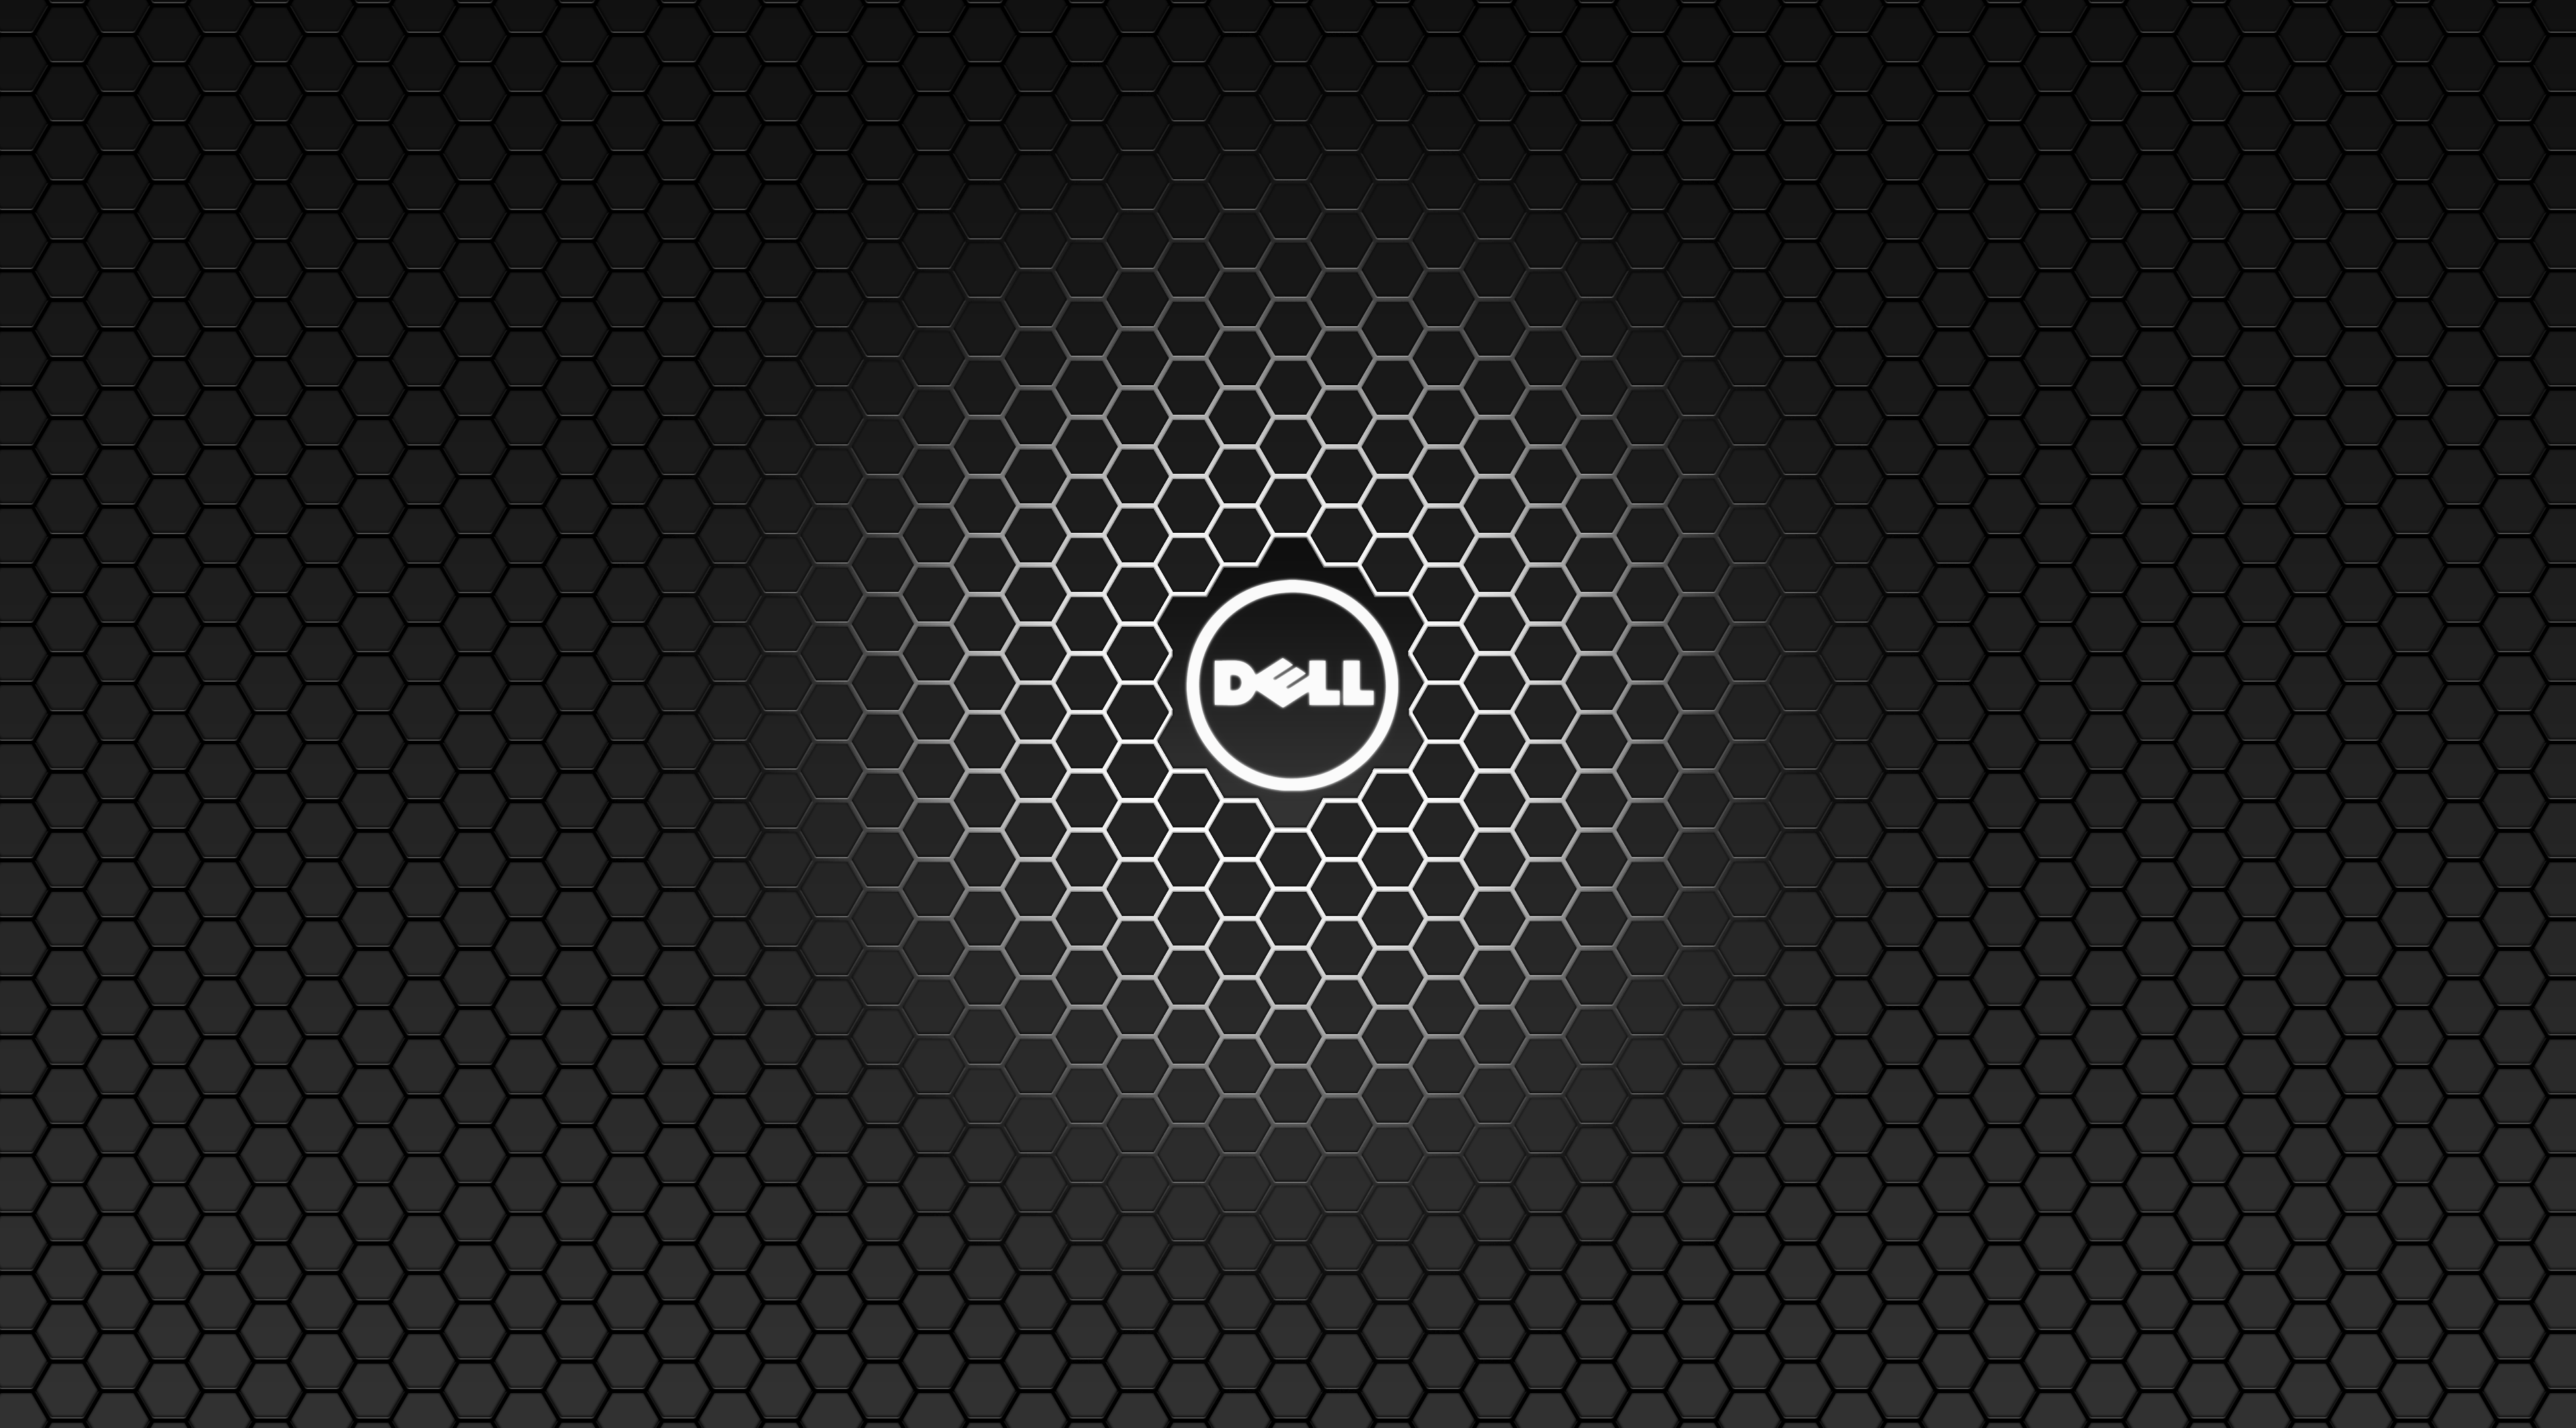 Dell 4K Wallpapers - Top Free Dell 4K